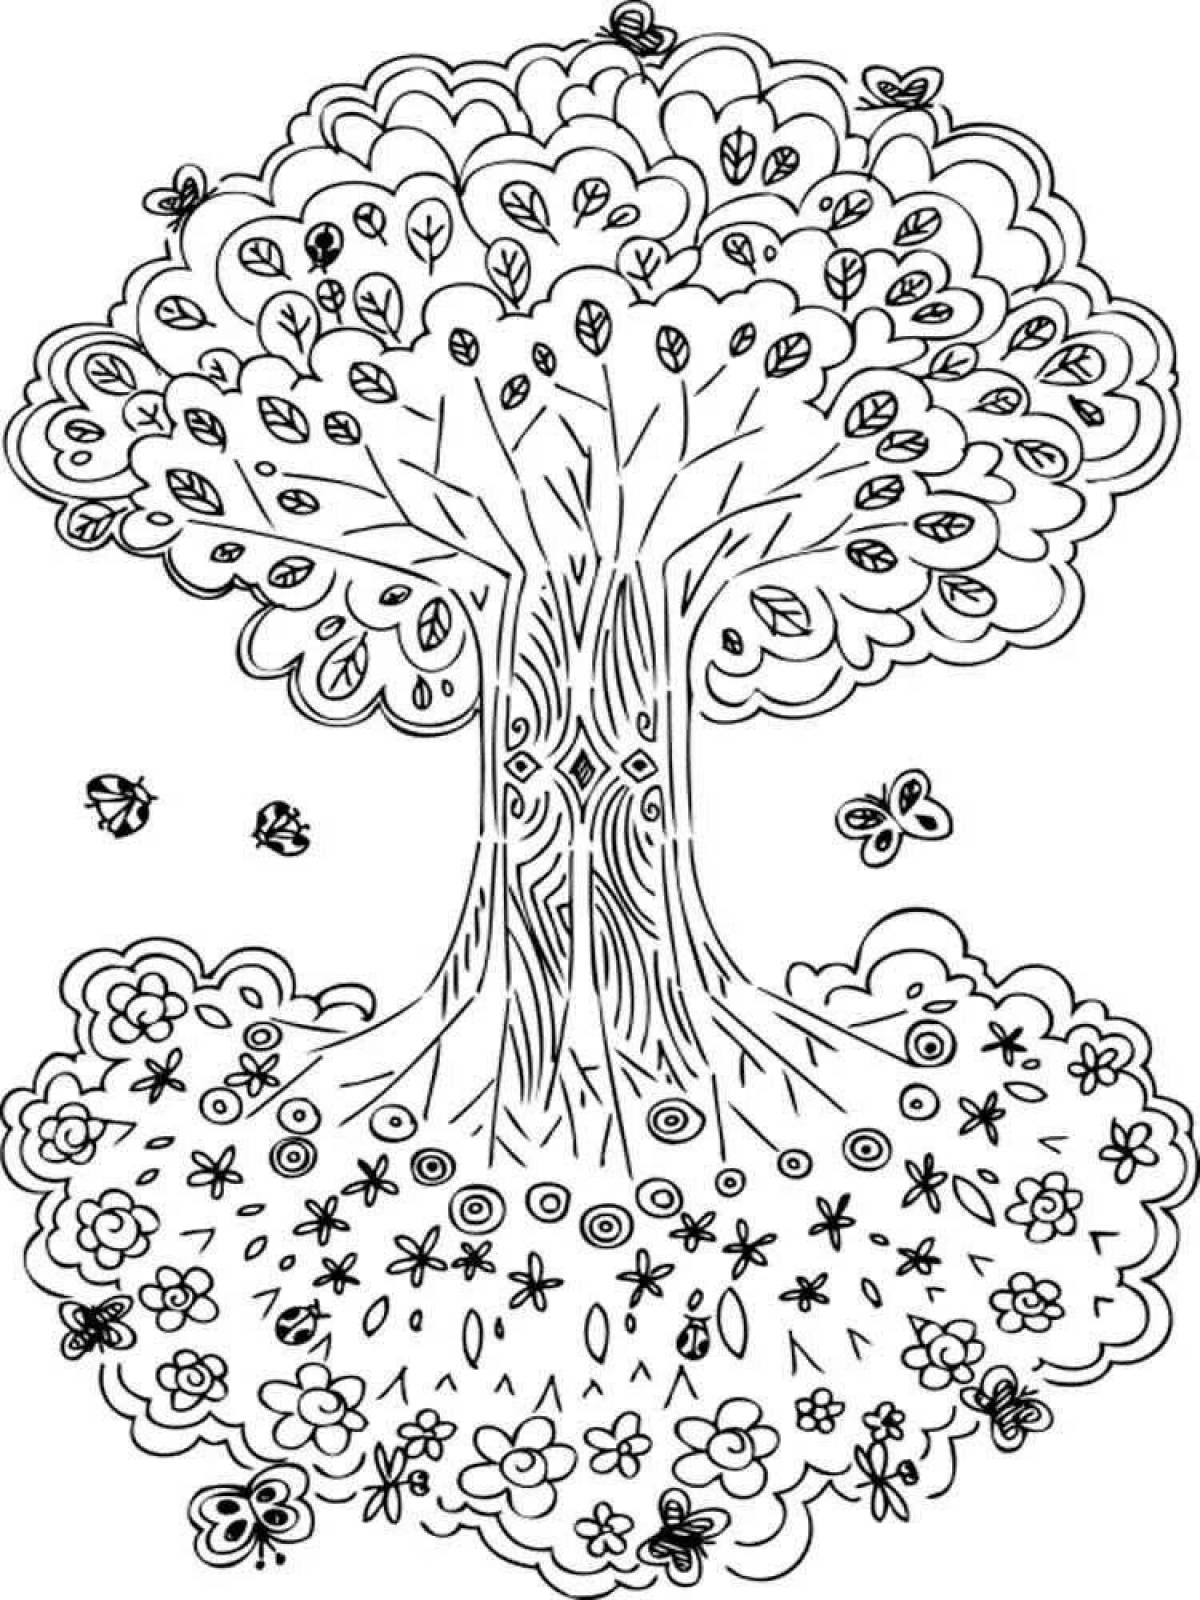 Great tree of life coloring book